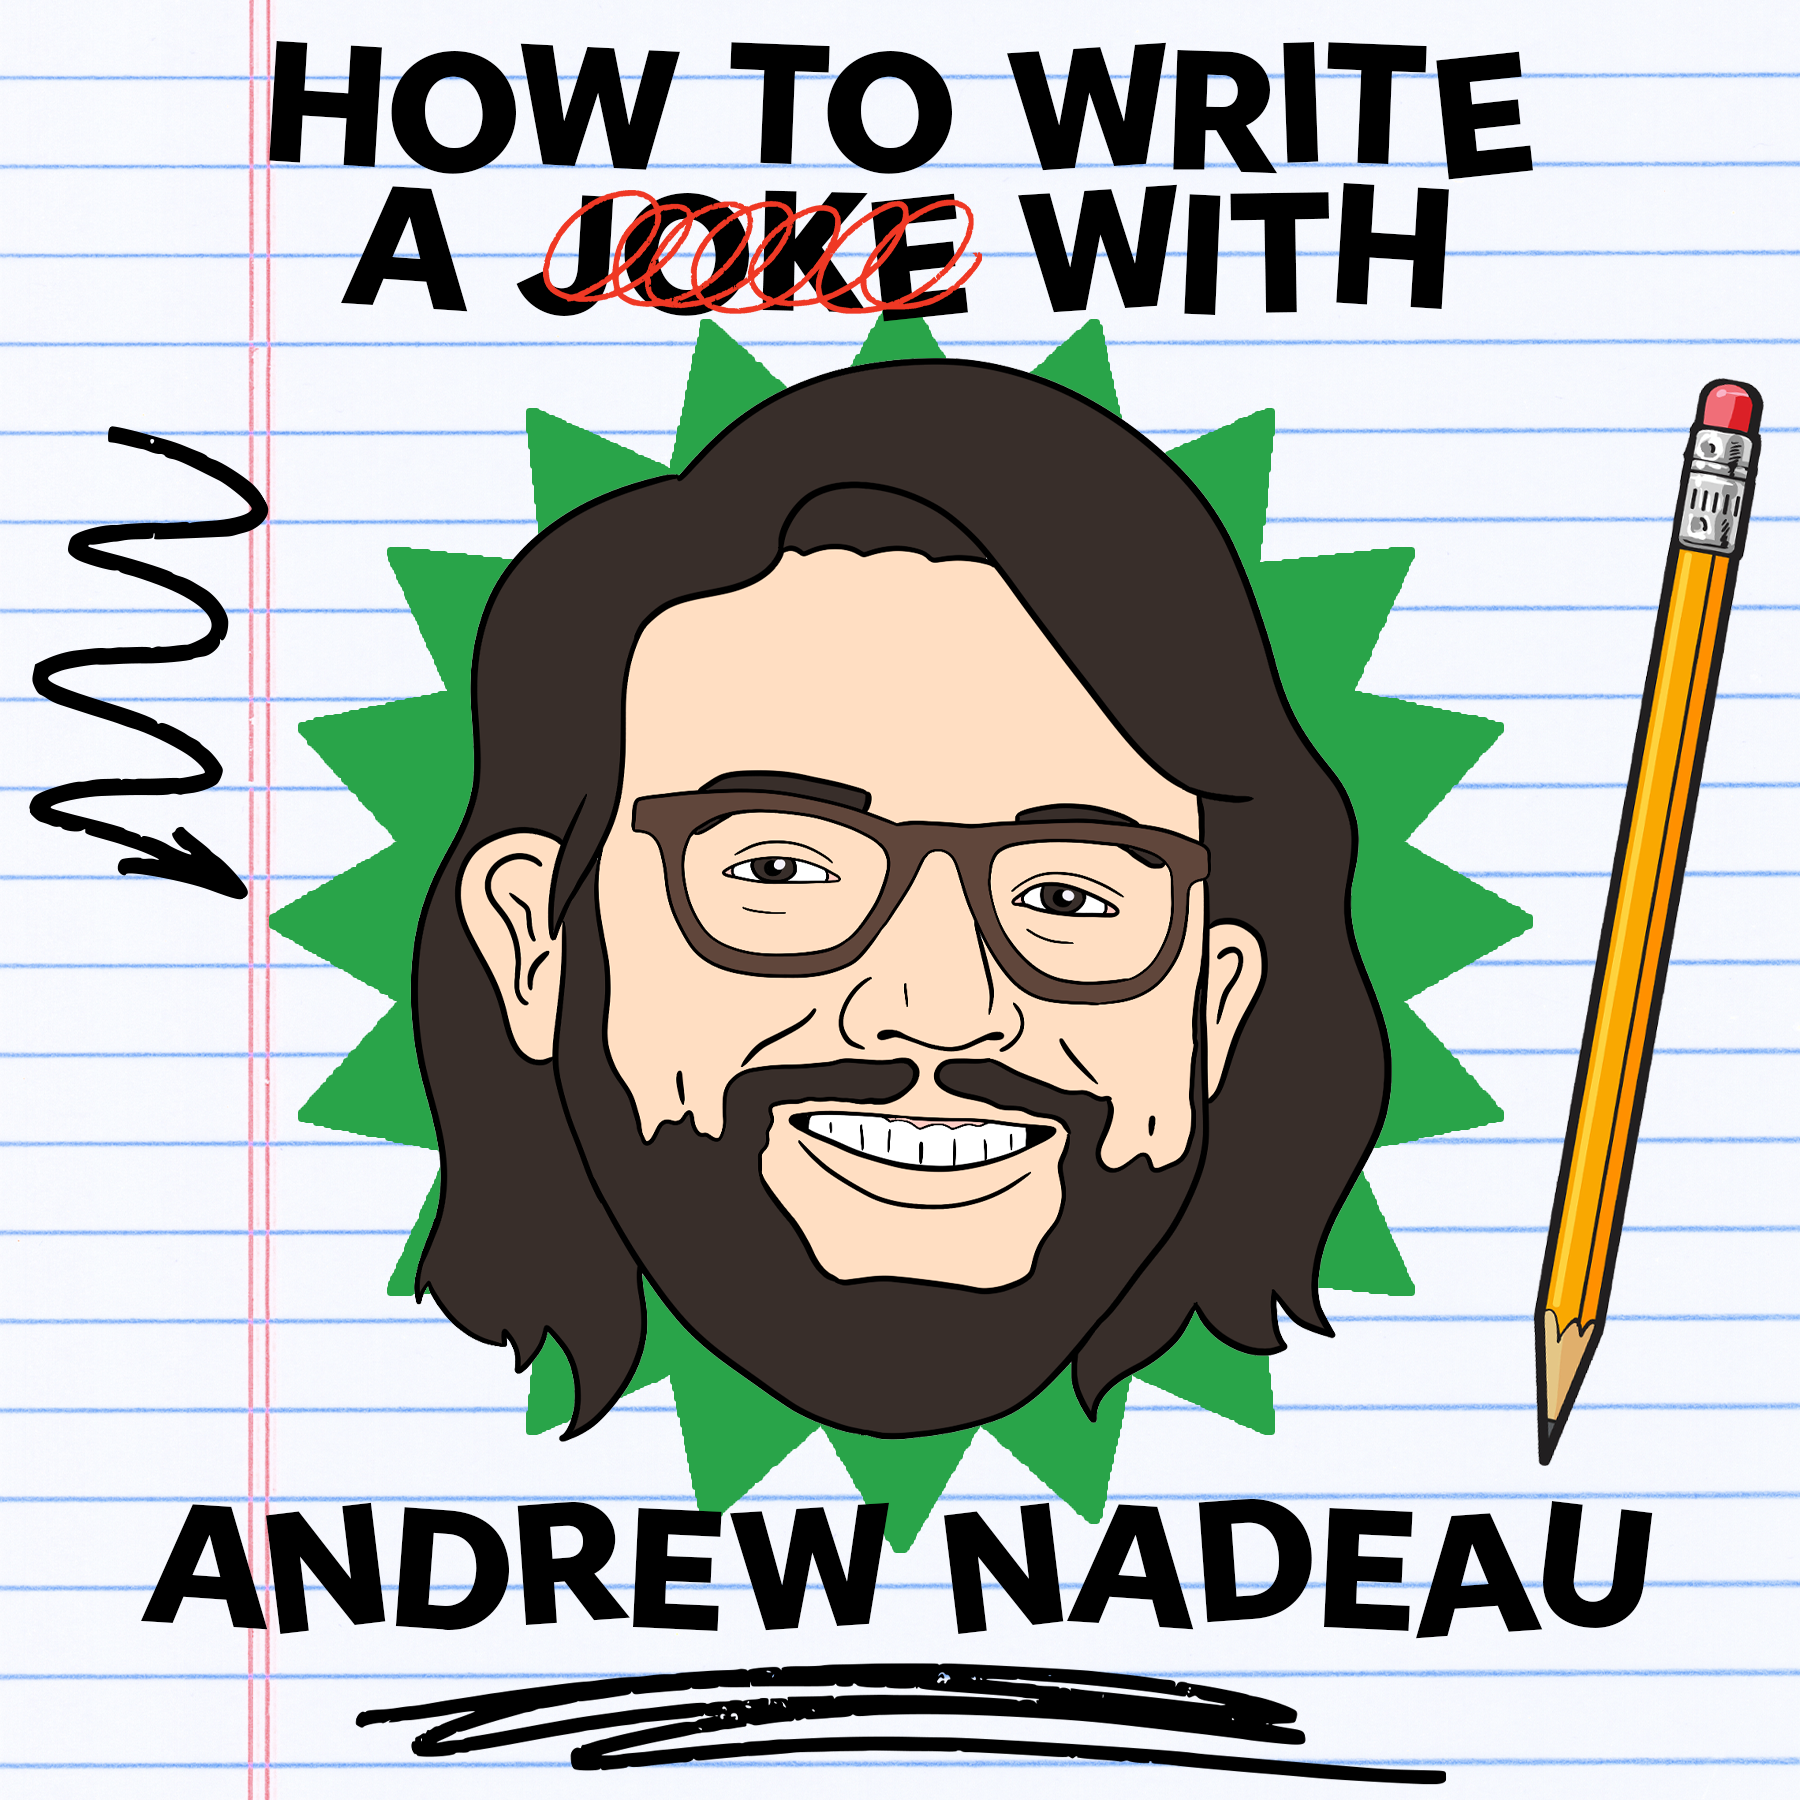 How to Write a Joke with Andrew Nadeau!